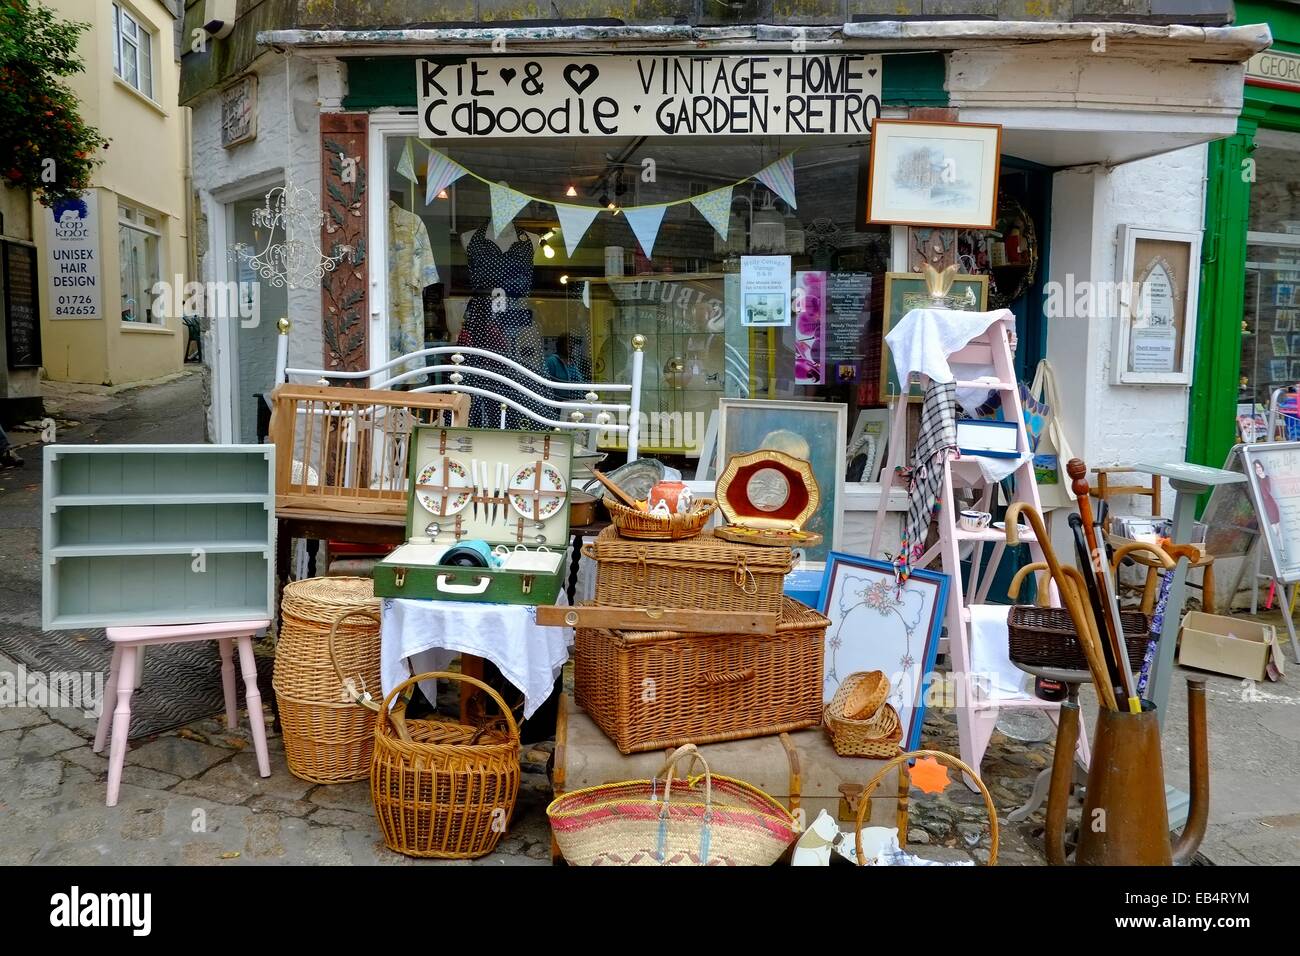 Kit and Caboodle vintage home garden retro furniture shop. Mevagissey,Cornwall,England UK Stock Photo